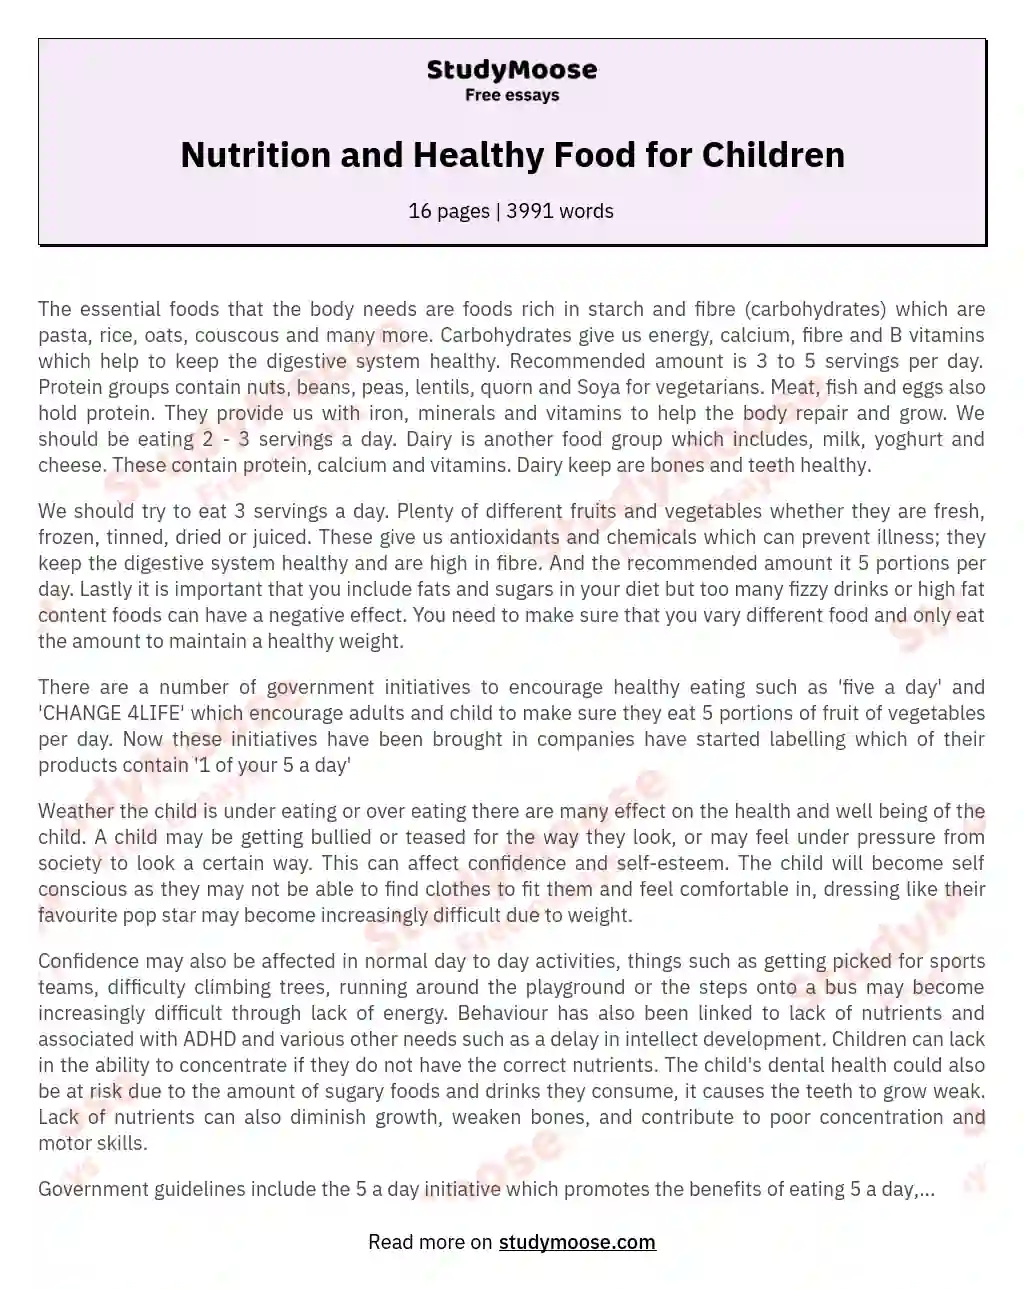 Nutrition and Healthy Food for Children essay